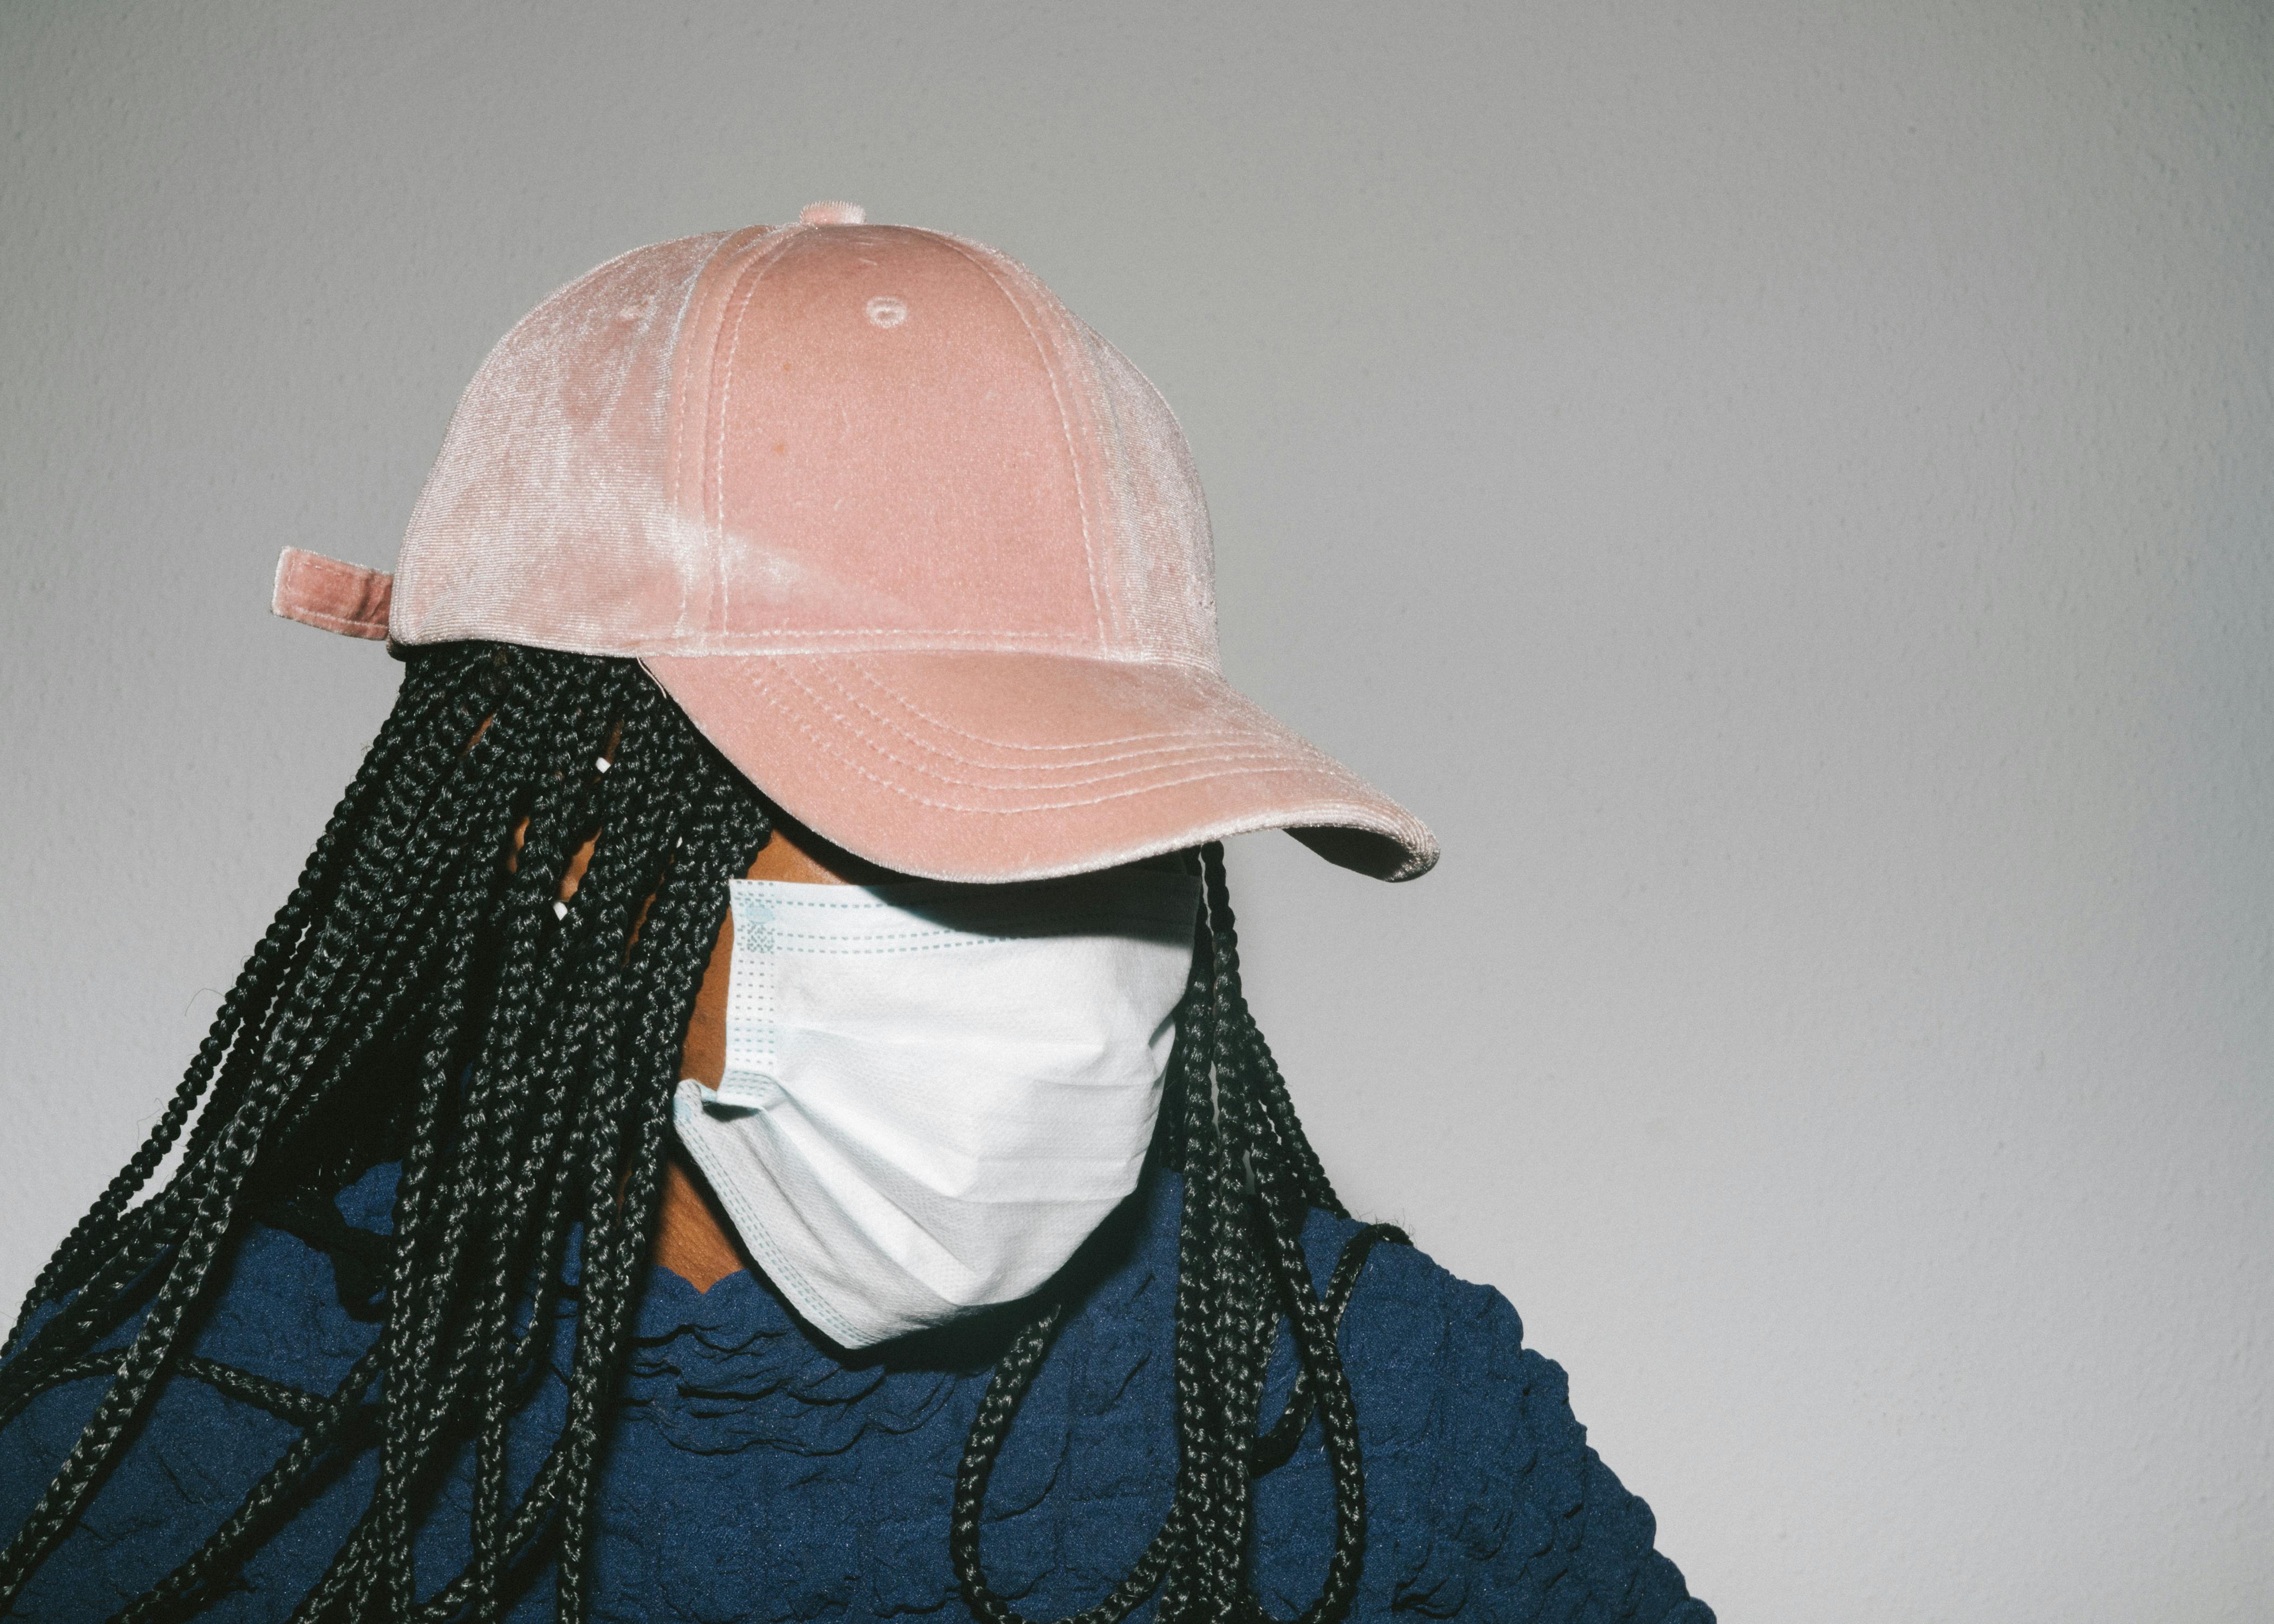 black woman in protective mask on gray background